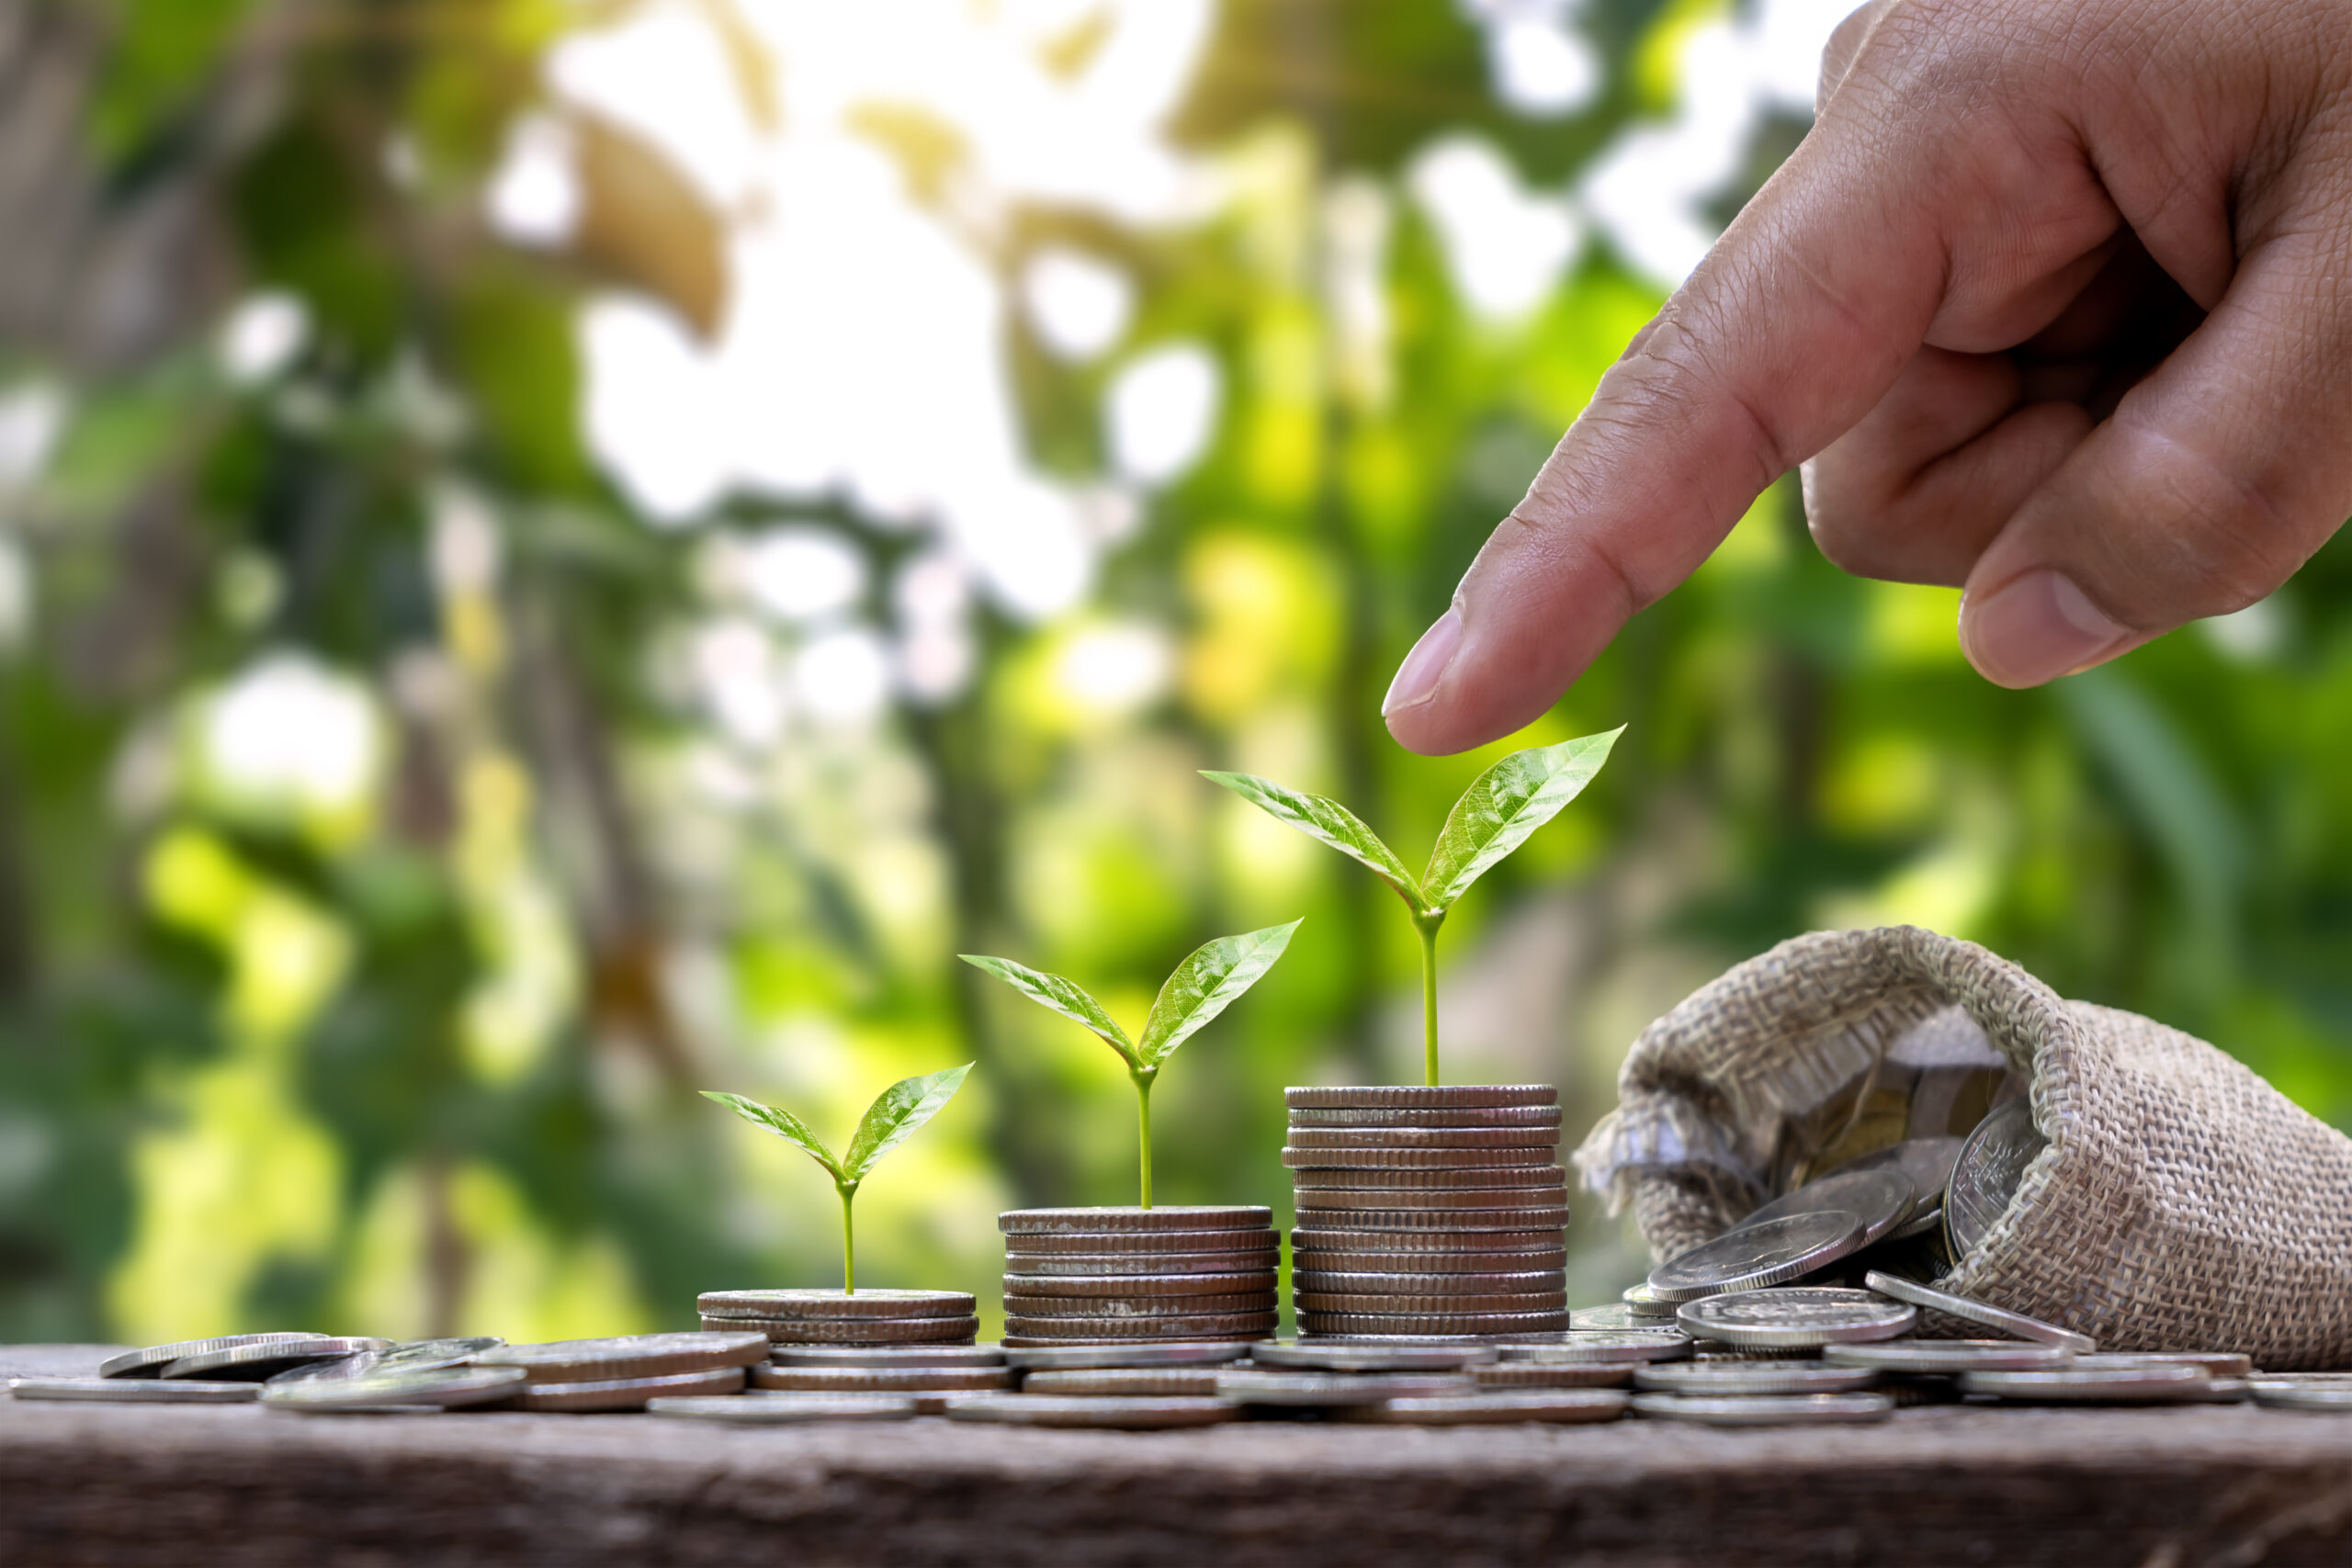 Planting a pile of money trees in sequence includes a woman's hand pointing to a tree on coins, savings and environmental investment ideas.